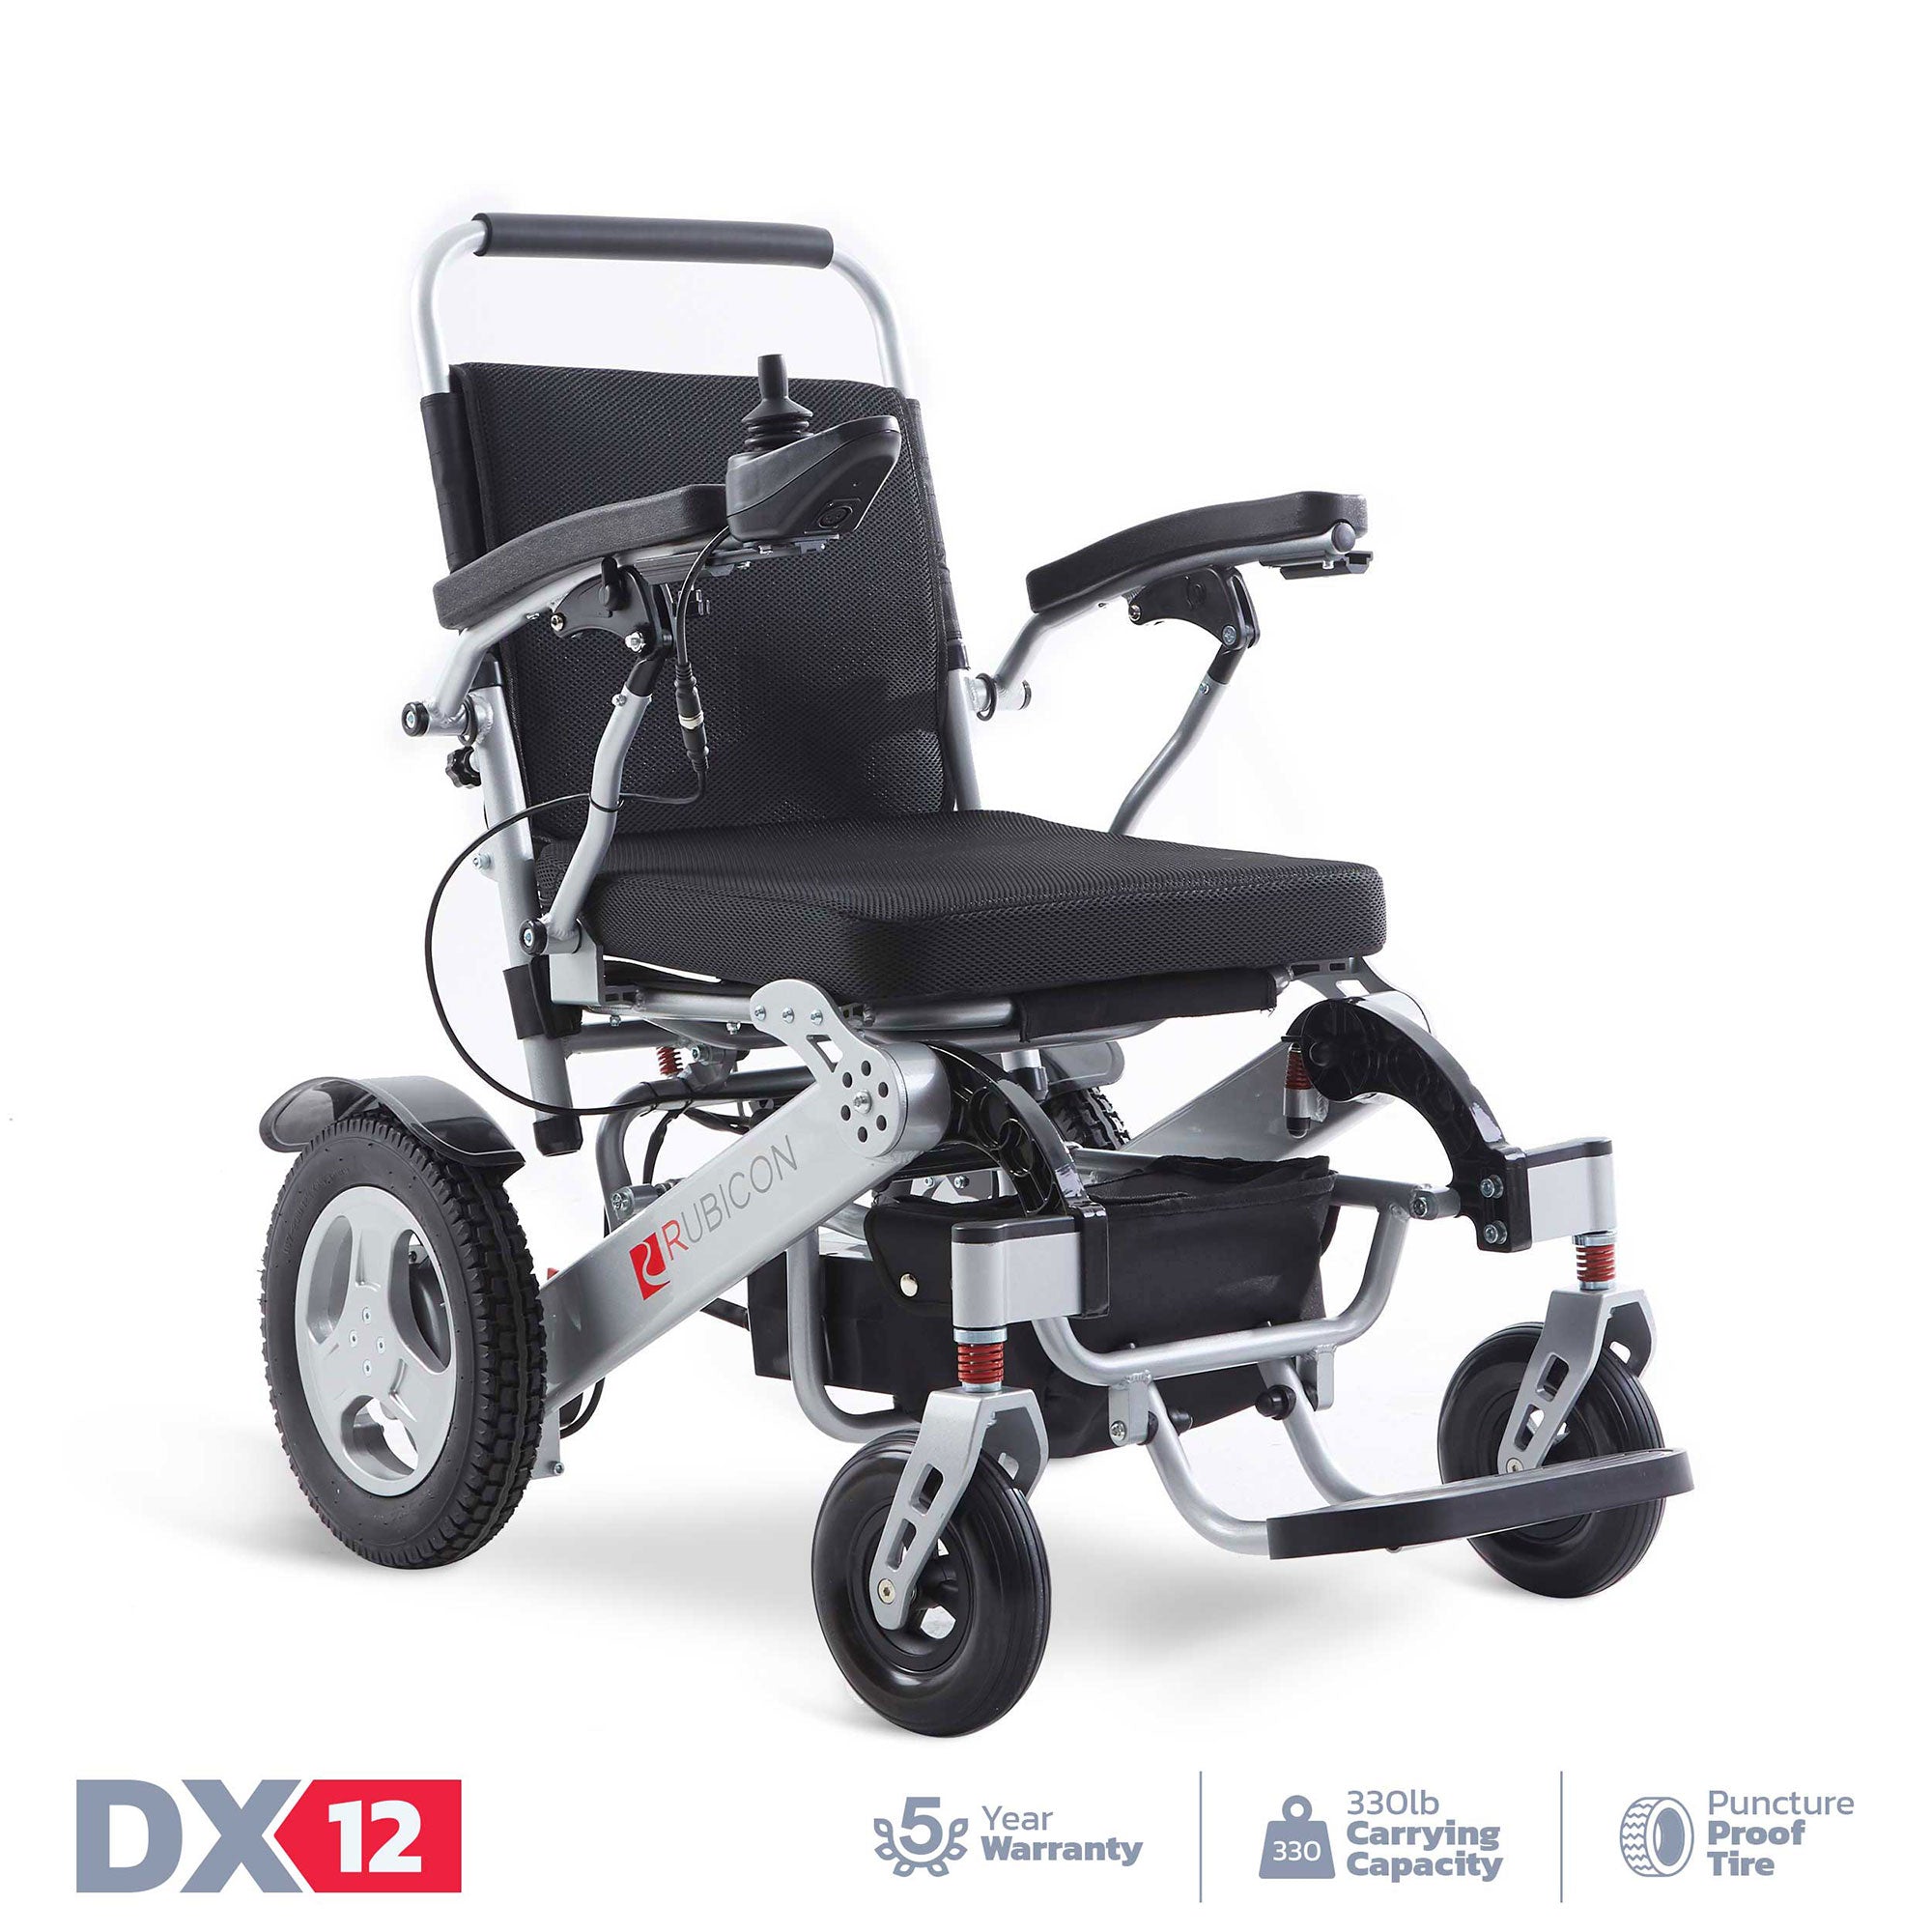 Rubicon DX12 - Brushless Motors Premium Electric Wheelchair - Electricwheelchair.Store